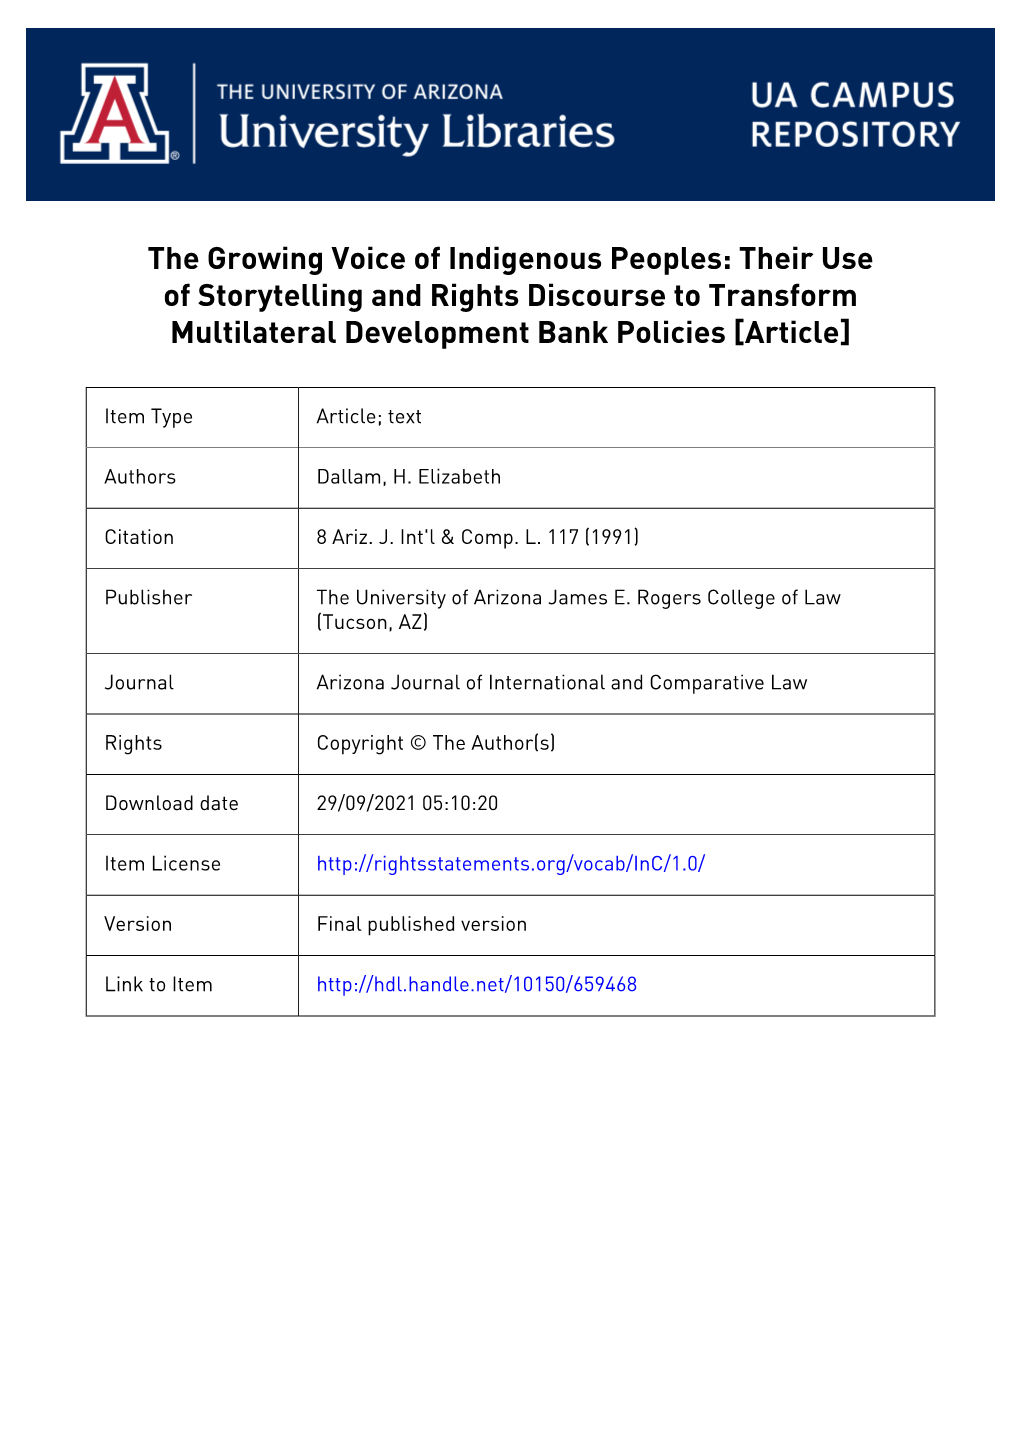 The Growing Voice of Indigenous Peoples: Their Use of Storytelling and Rights Discourse to Transform Multilateral Development Bank Policies [Article]